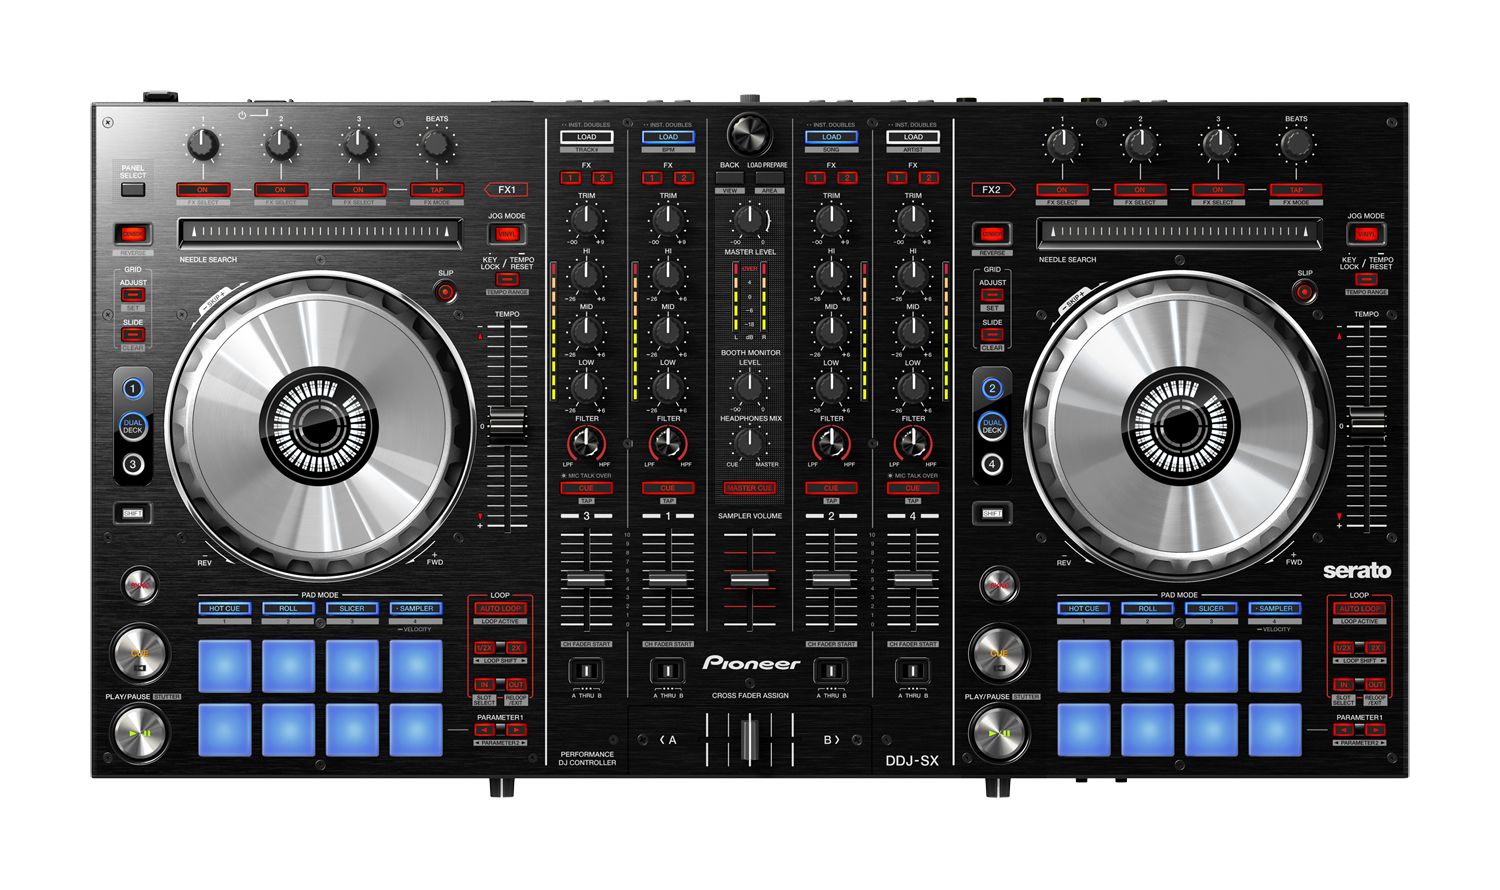 The Pioneer DDJ-SX in all its glory.